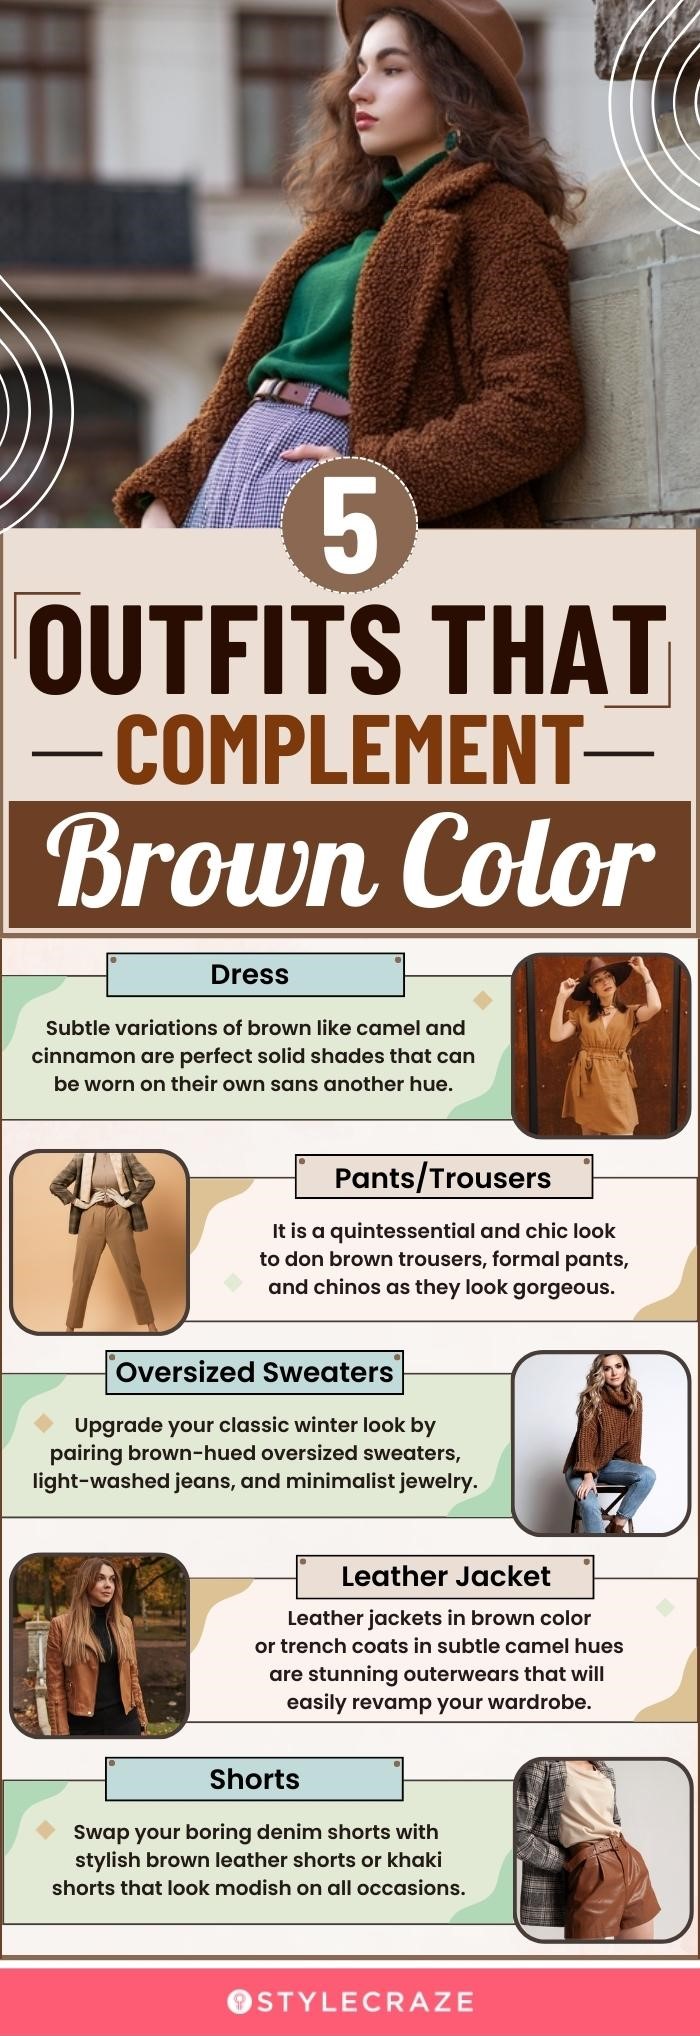 5 outfits that compliment brown color (infographic)